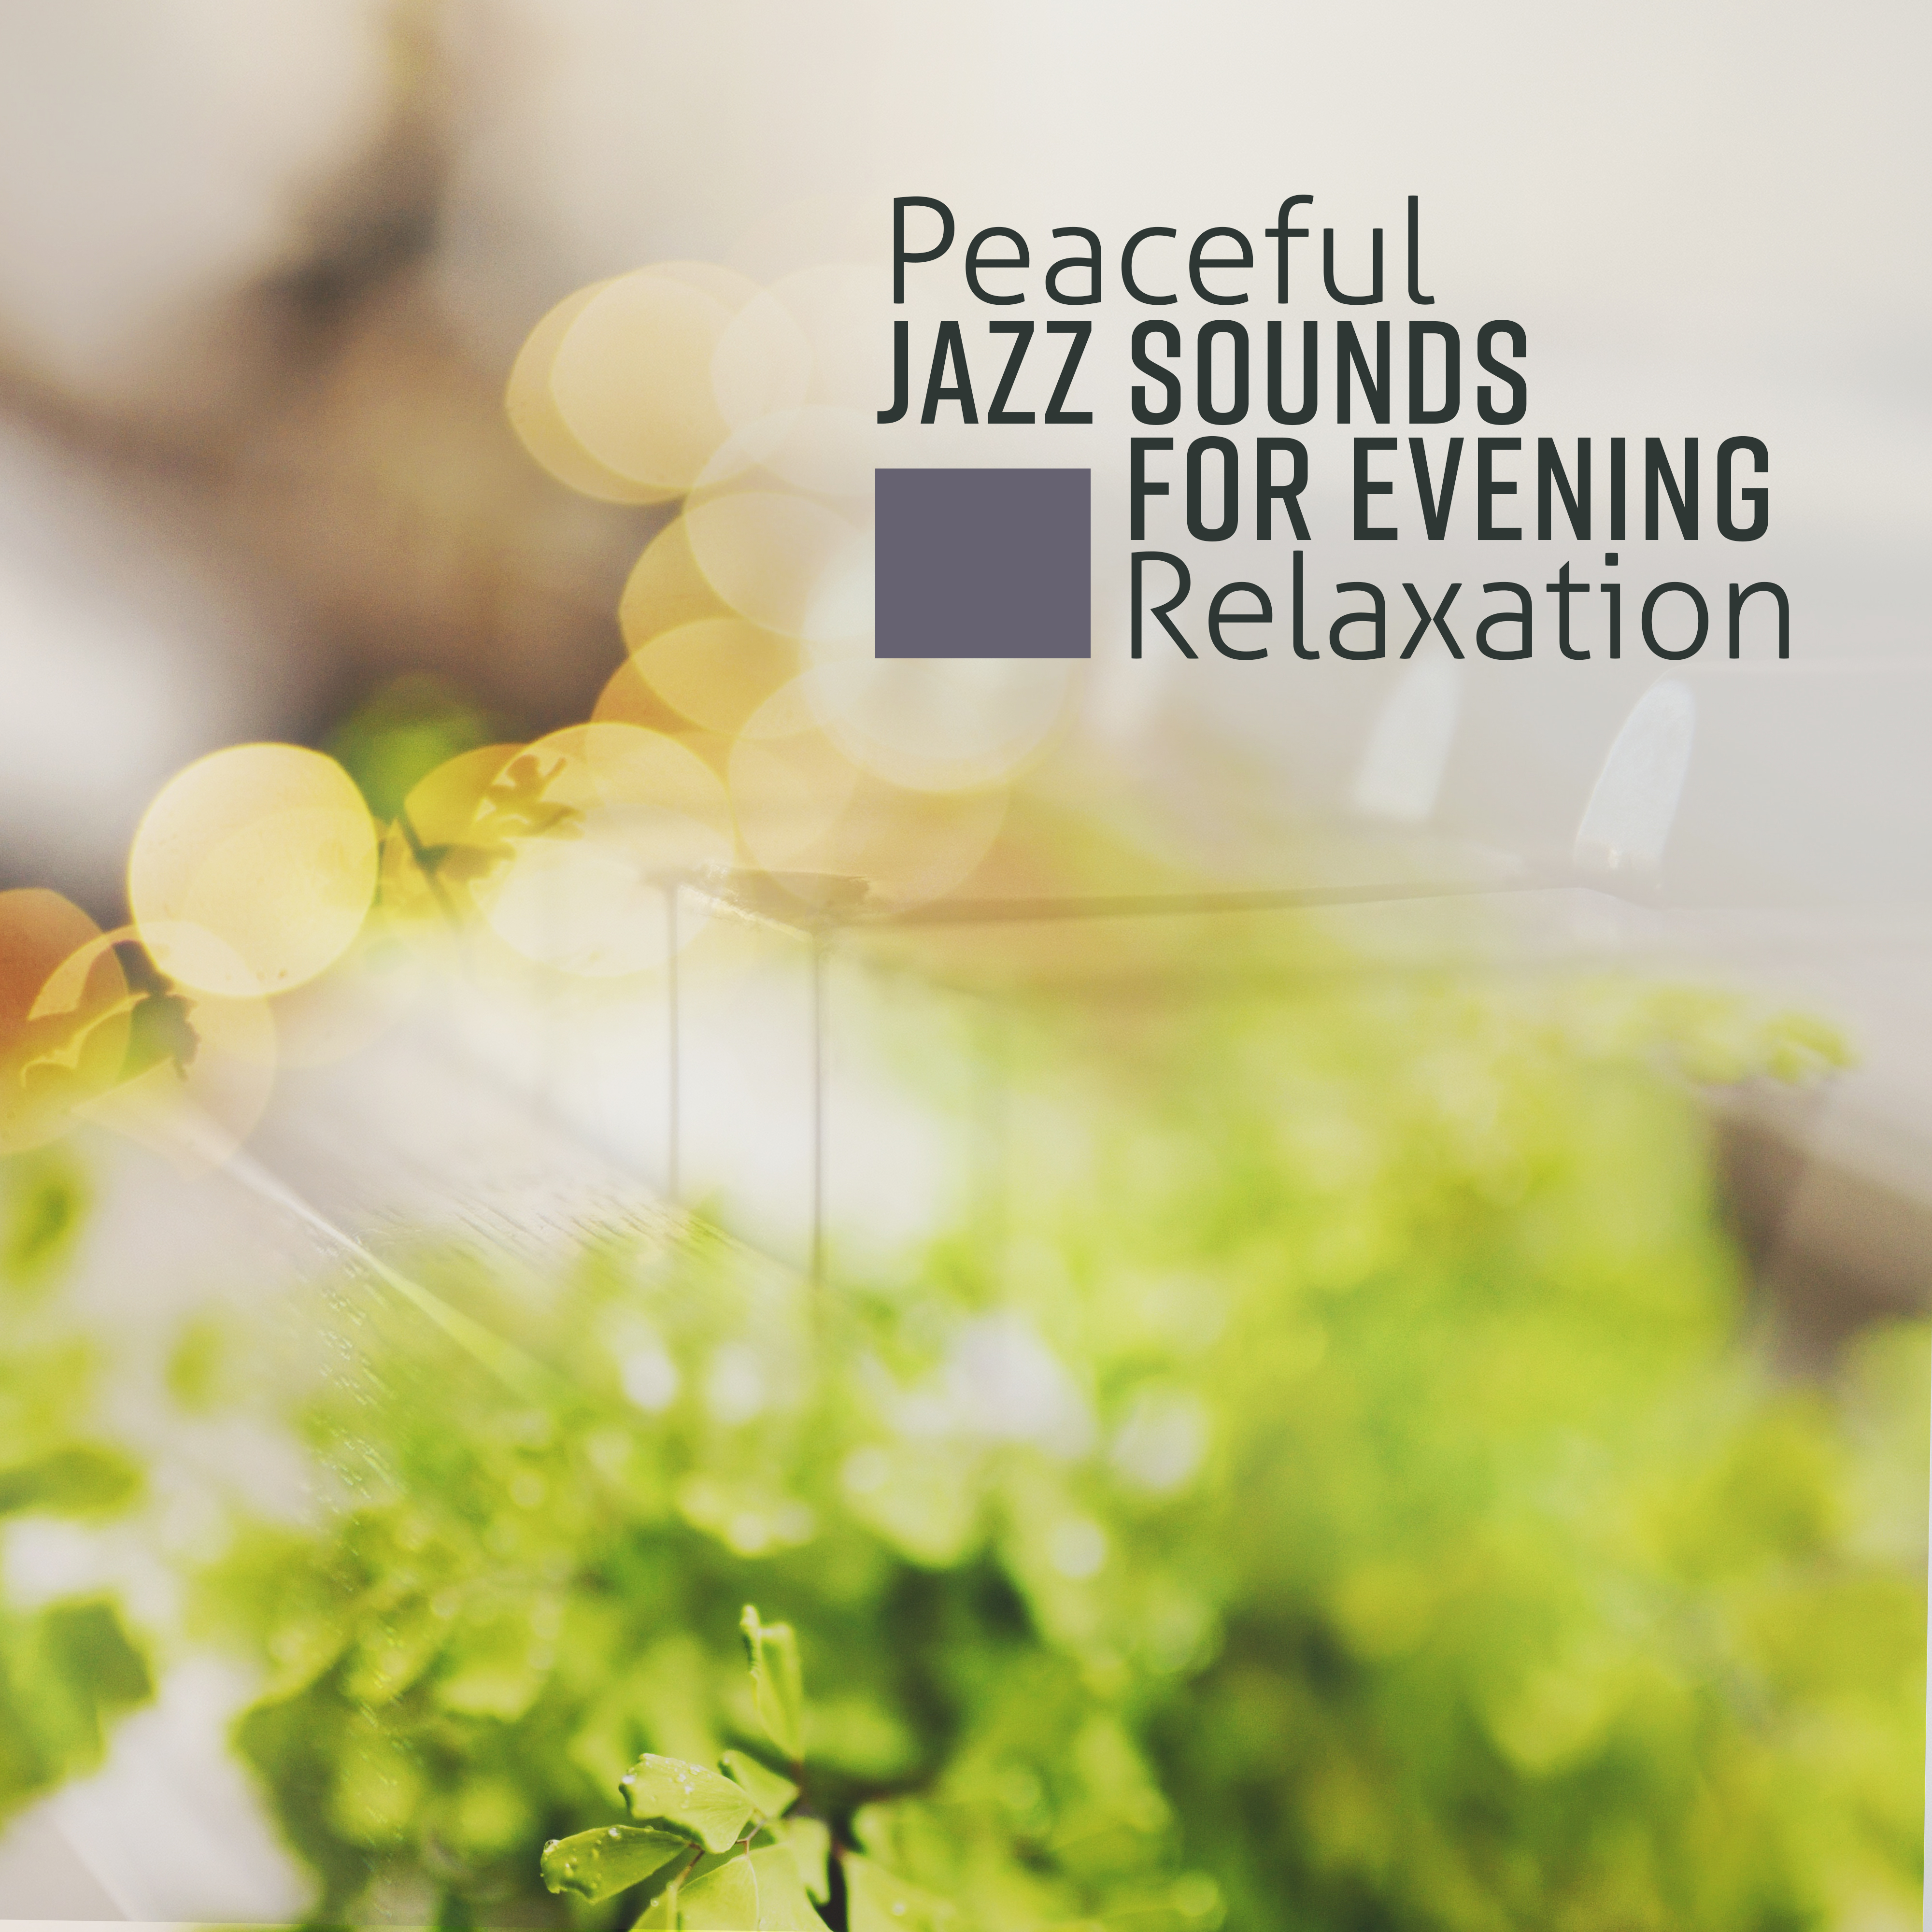 Peaceful Jazz Sounds for Evening Relaxation